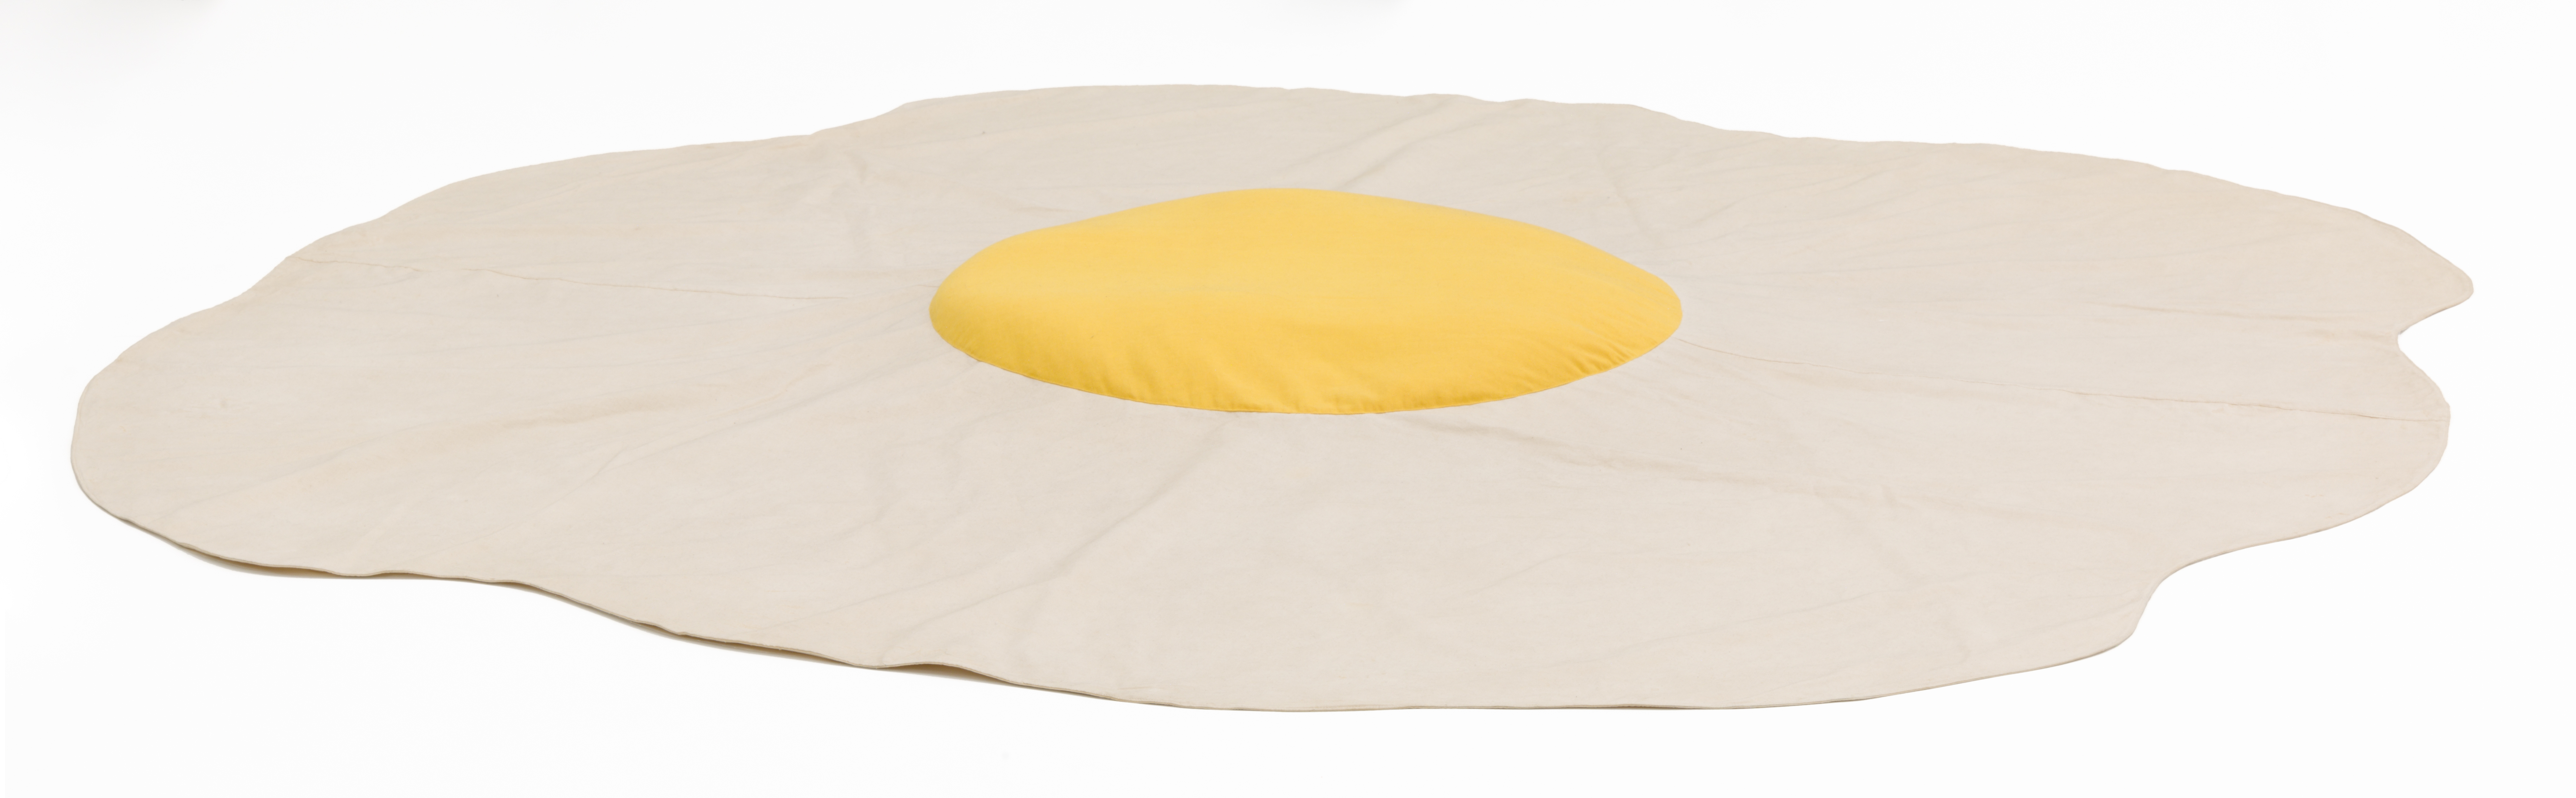 Claes Oldenburg, Sculpture in the Form of a Fried Egg, 1966/1971. Canvas, dyed cotton, and expanded polystyrene. Diameter, 309.9 cm. Collection Museum of Contemporary Art Chicago, gift of Anne and William J. Hokin, 1986.65. Photo: Nathan Keay, Â© MCA Chicago